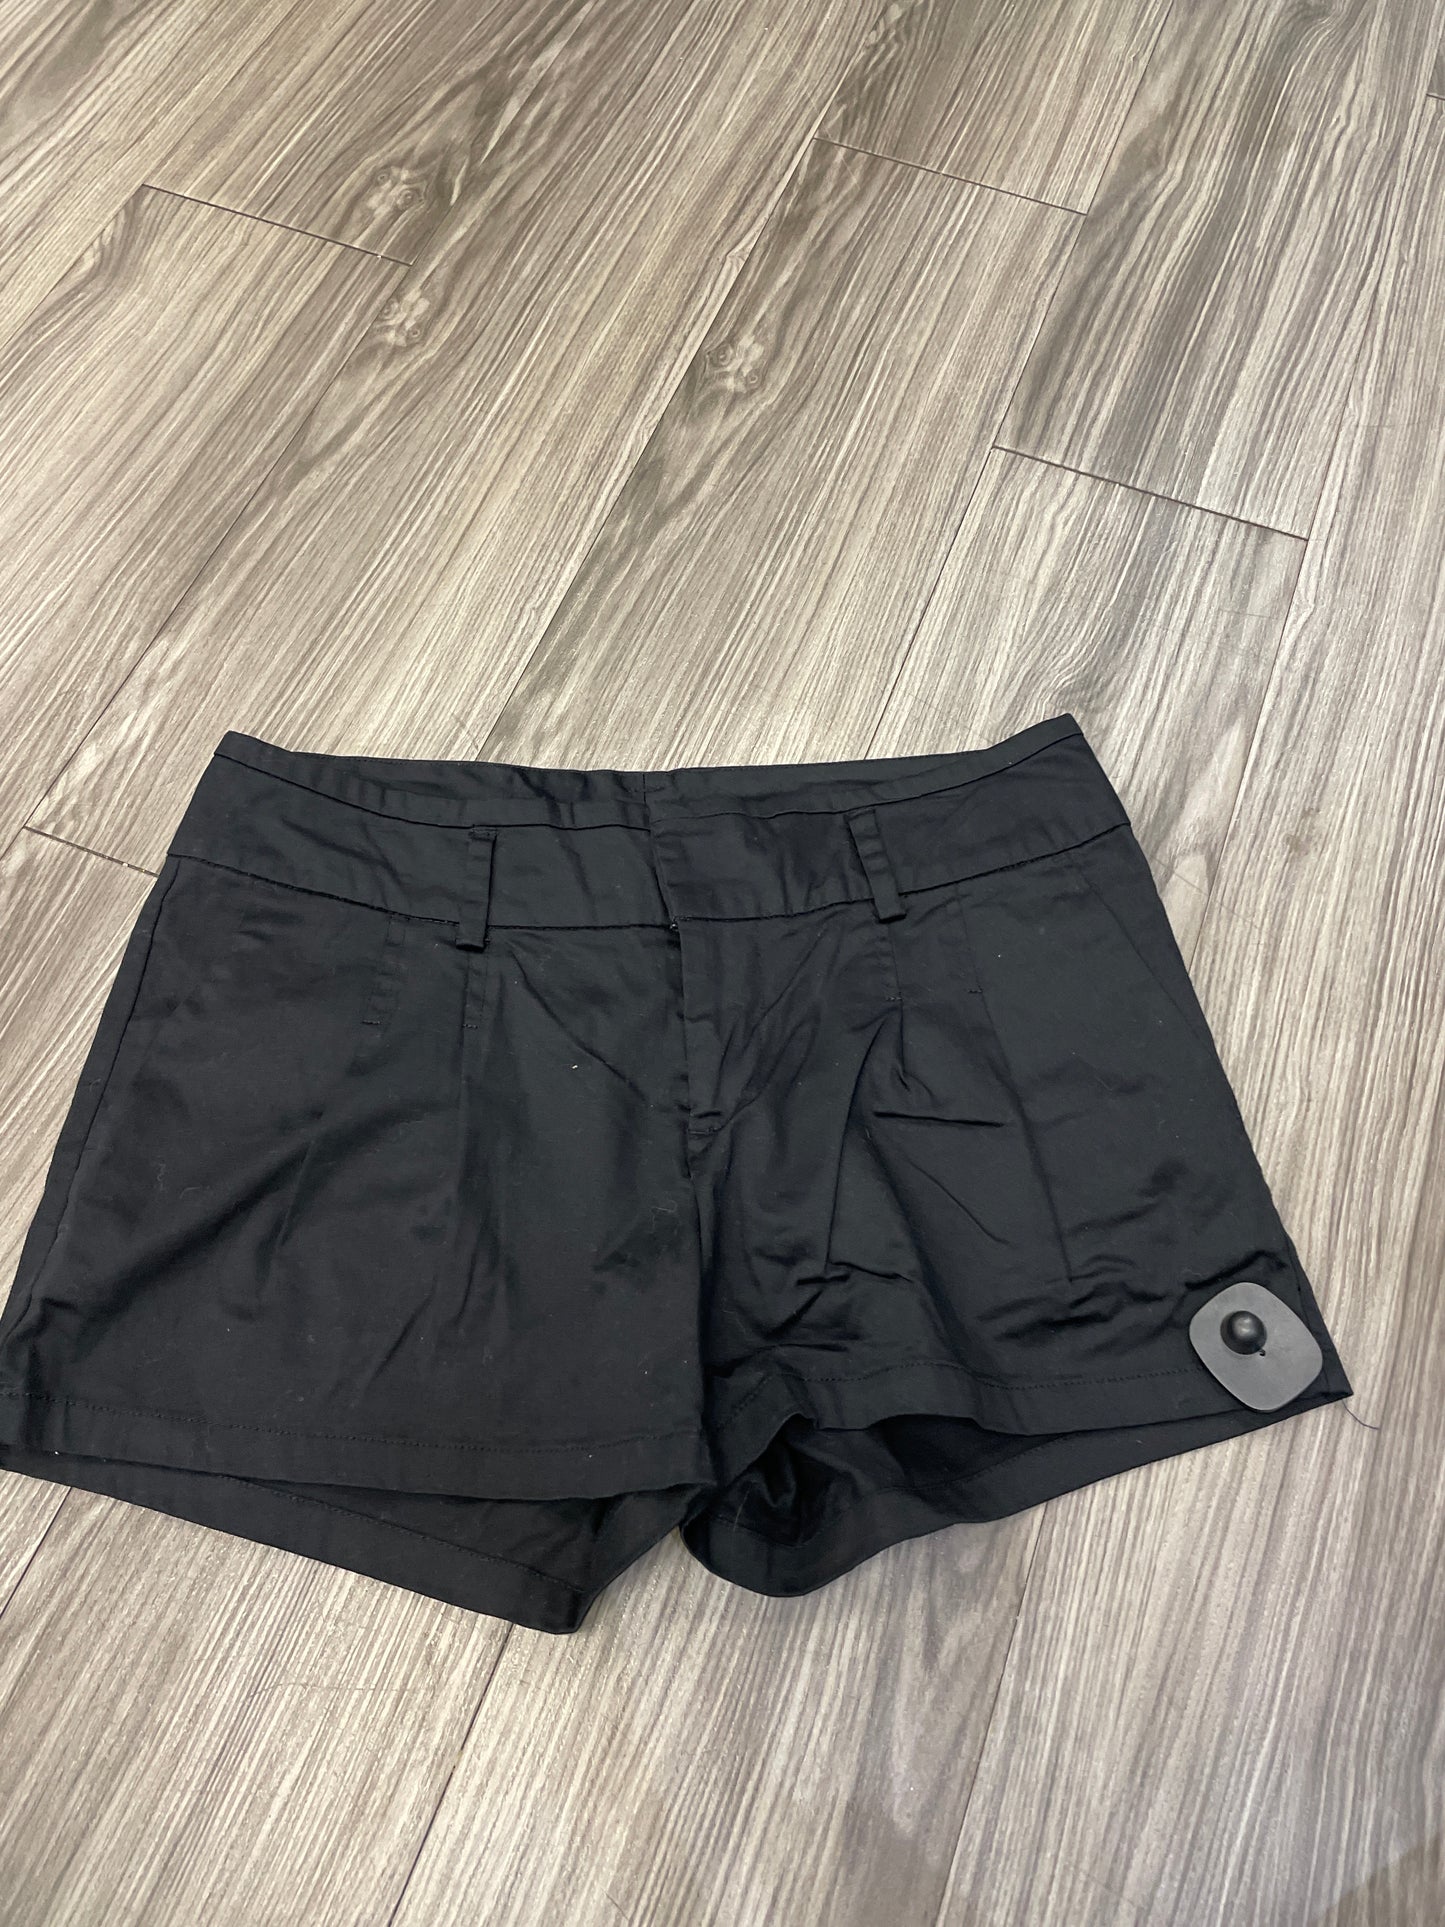 Shorts By Ana  Size: 10